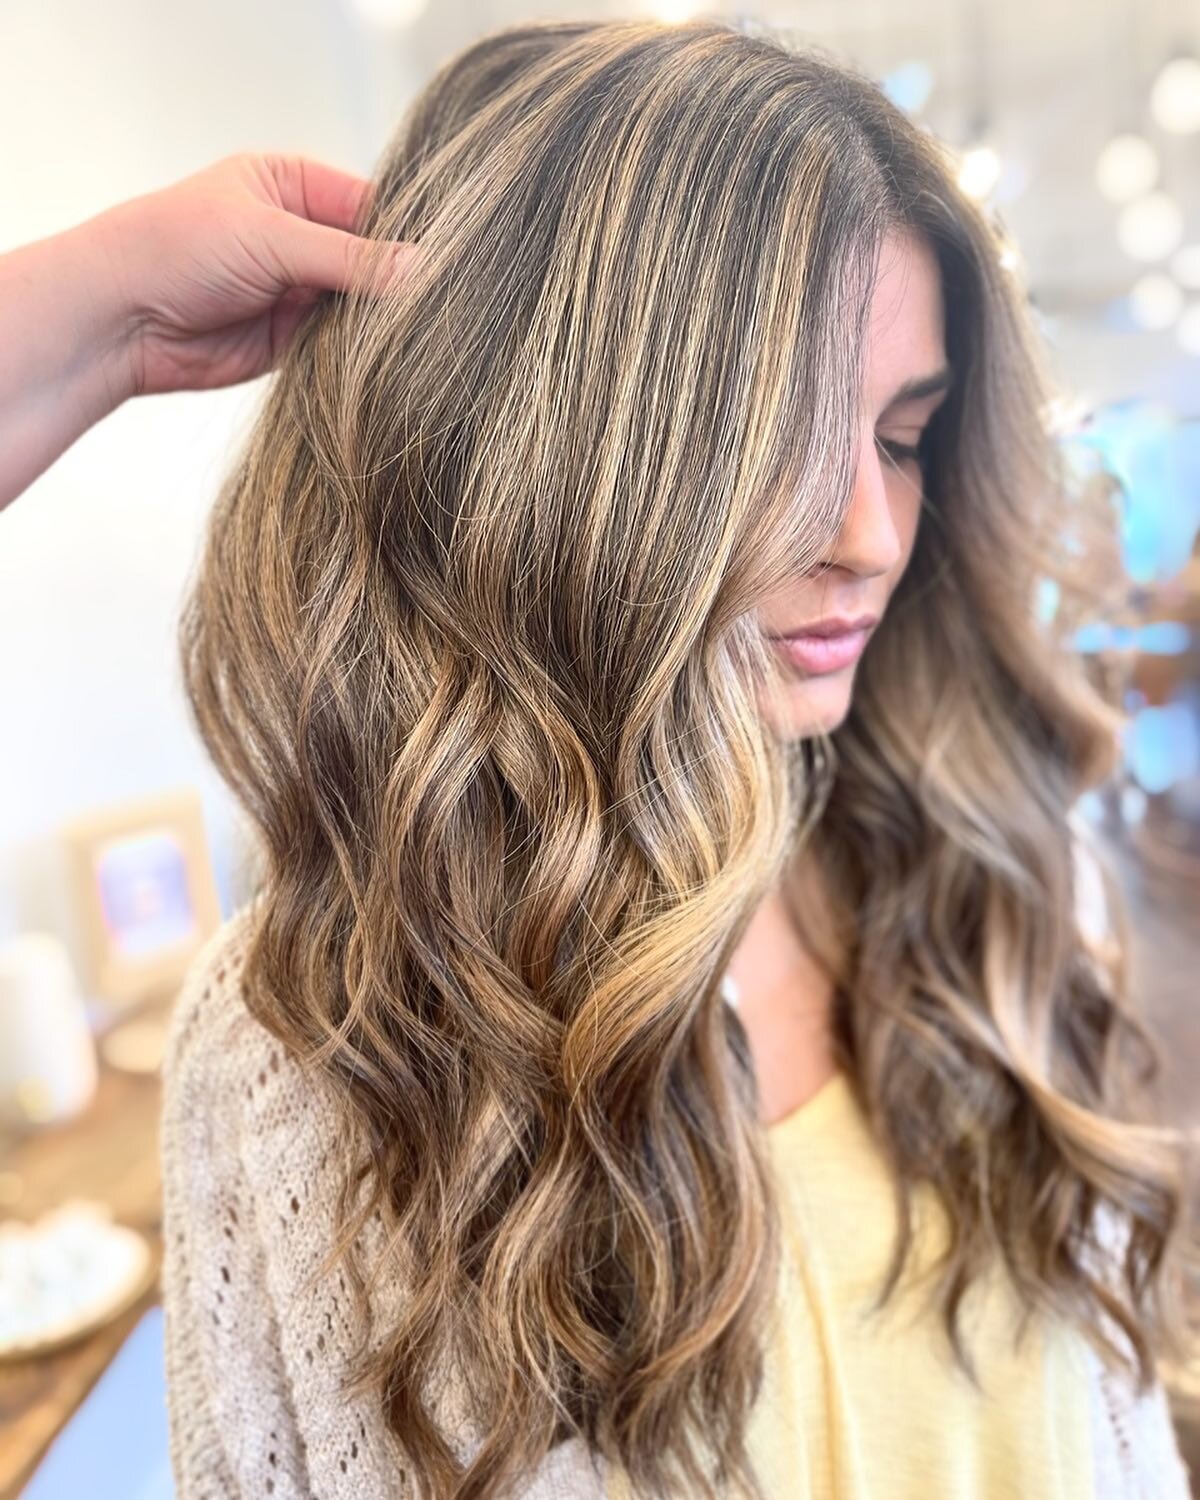 🌿Teasylight Queen🌿 
Full head of Teasylights + beautiful length and volume = PERFECTION! 
&bull;
Schedule your low maintenance summer hair appointment today by calling (860)999&bull;1493! 
&bull;
&bull;
&bull;
&bull;
&bull;
&bull;
&bull;
&bull;
&bu